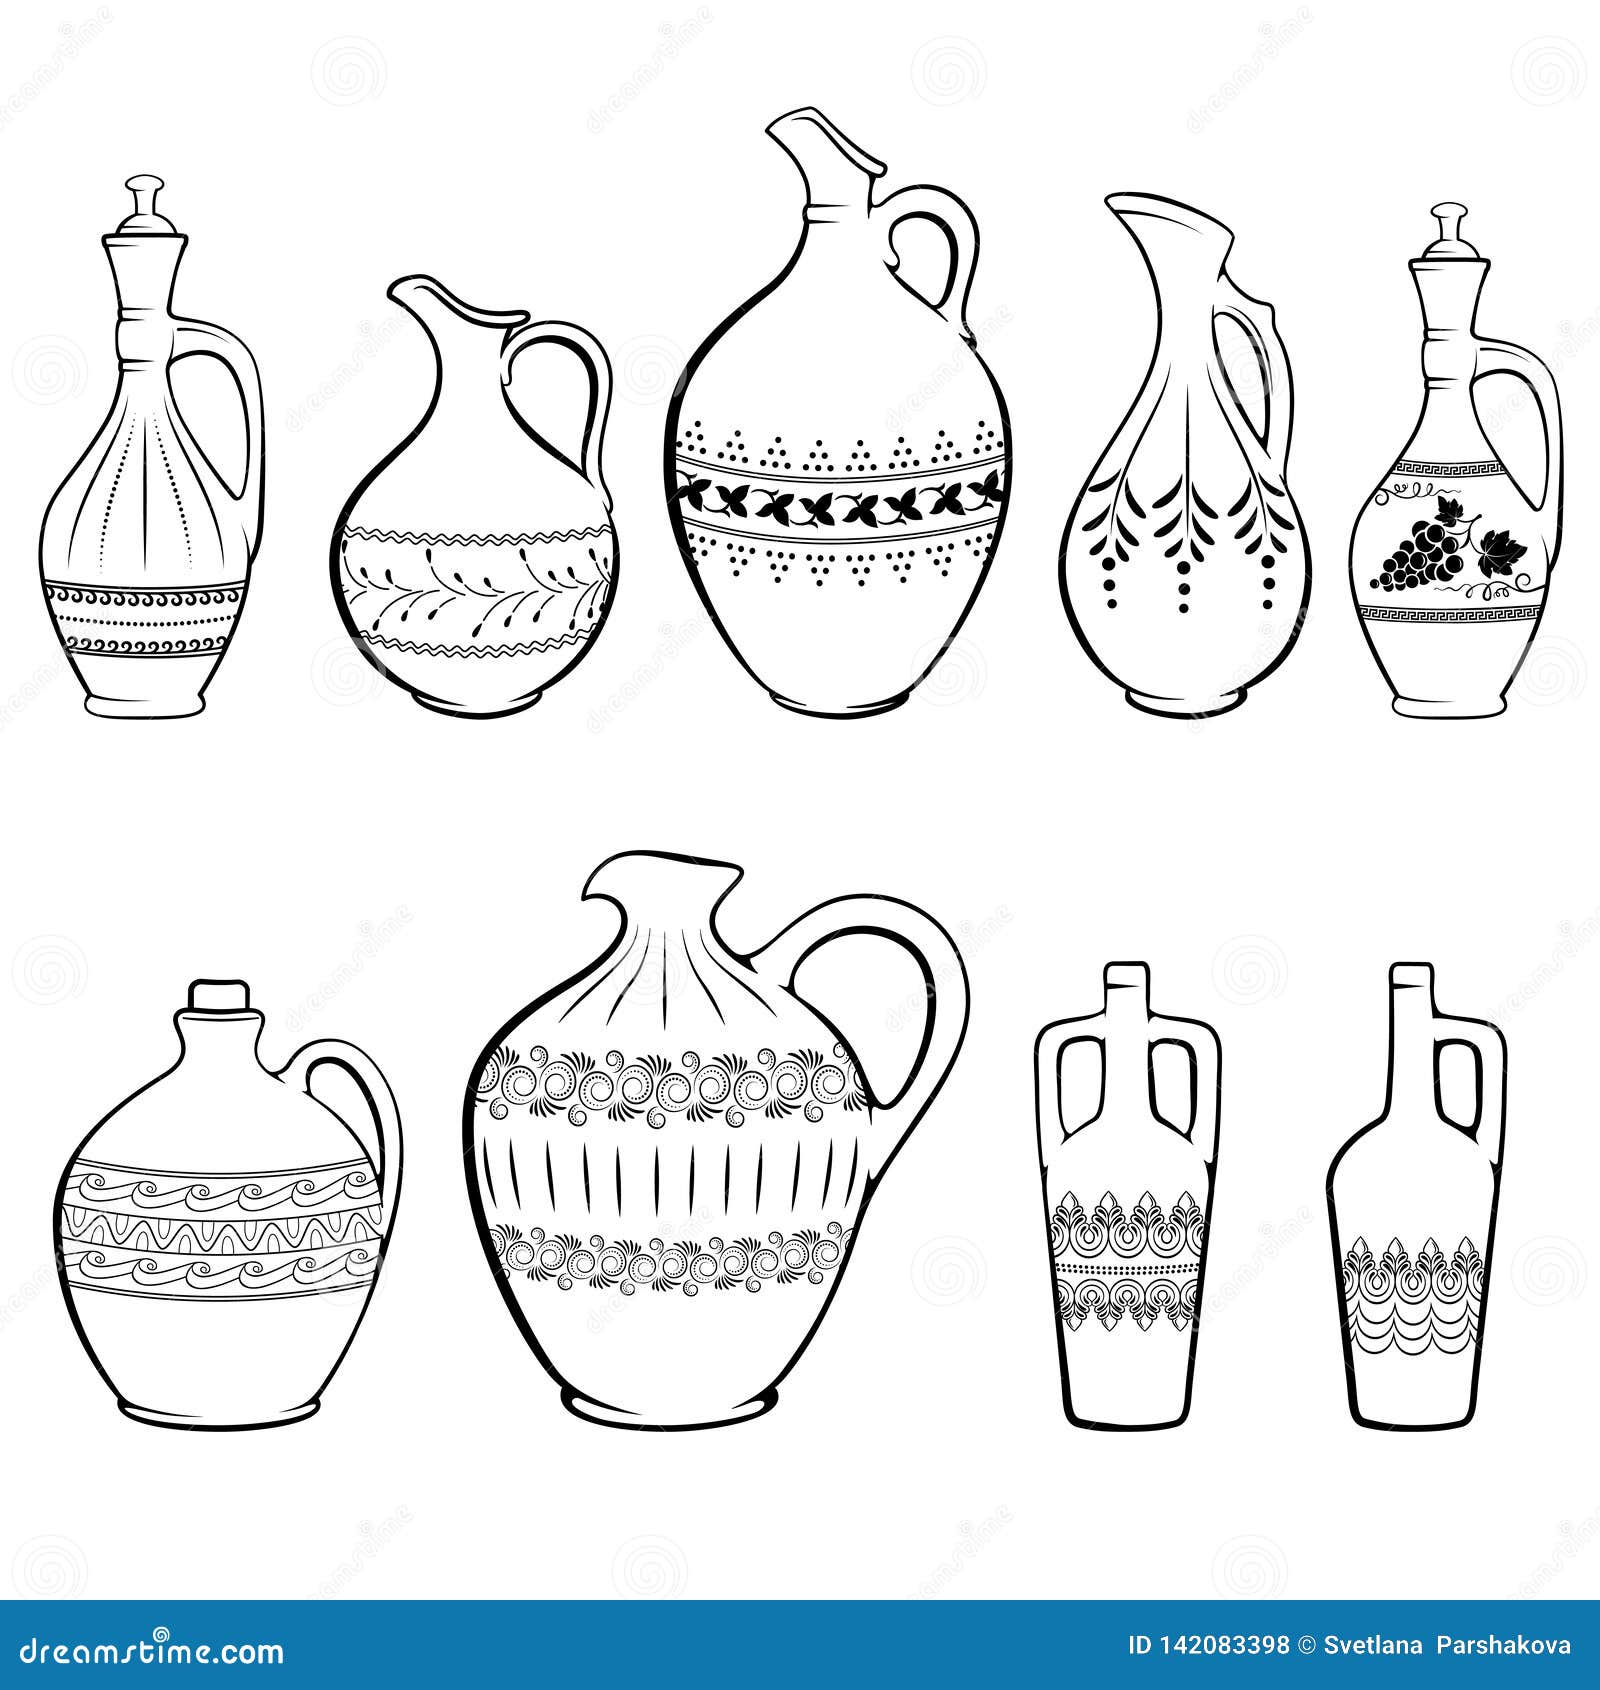 Pottery in the Indian subcontinent - Wikipedia